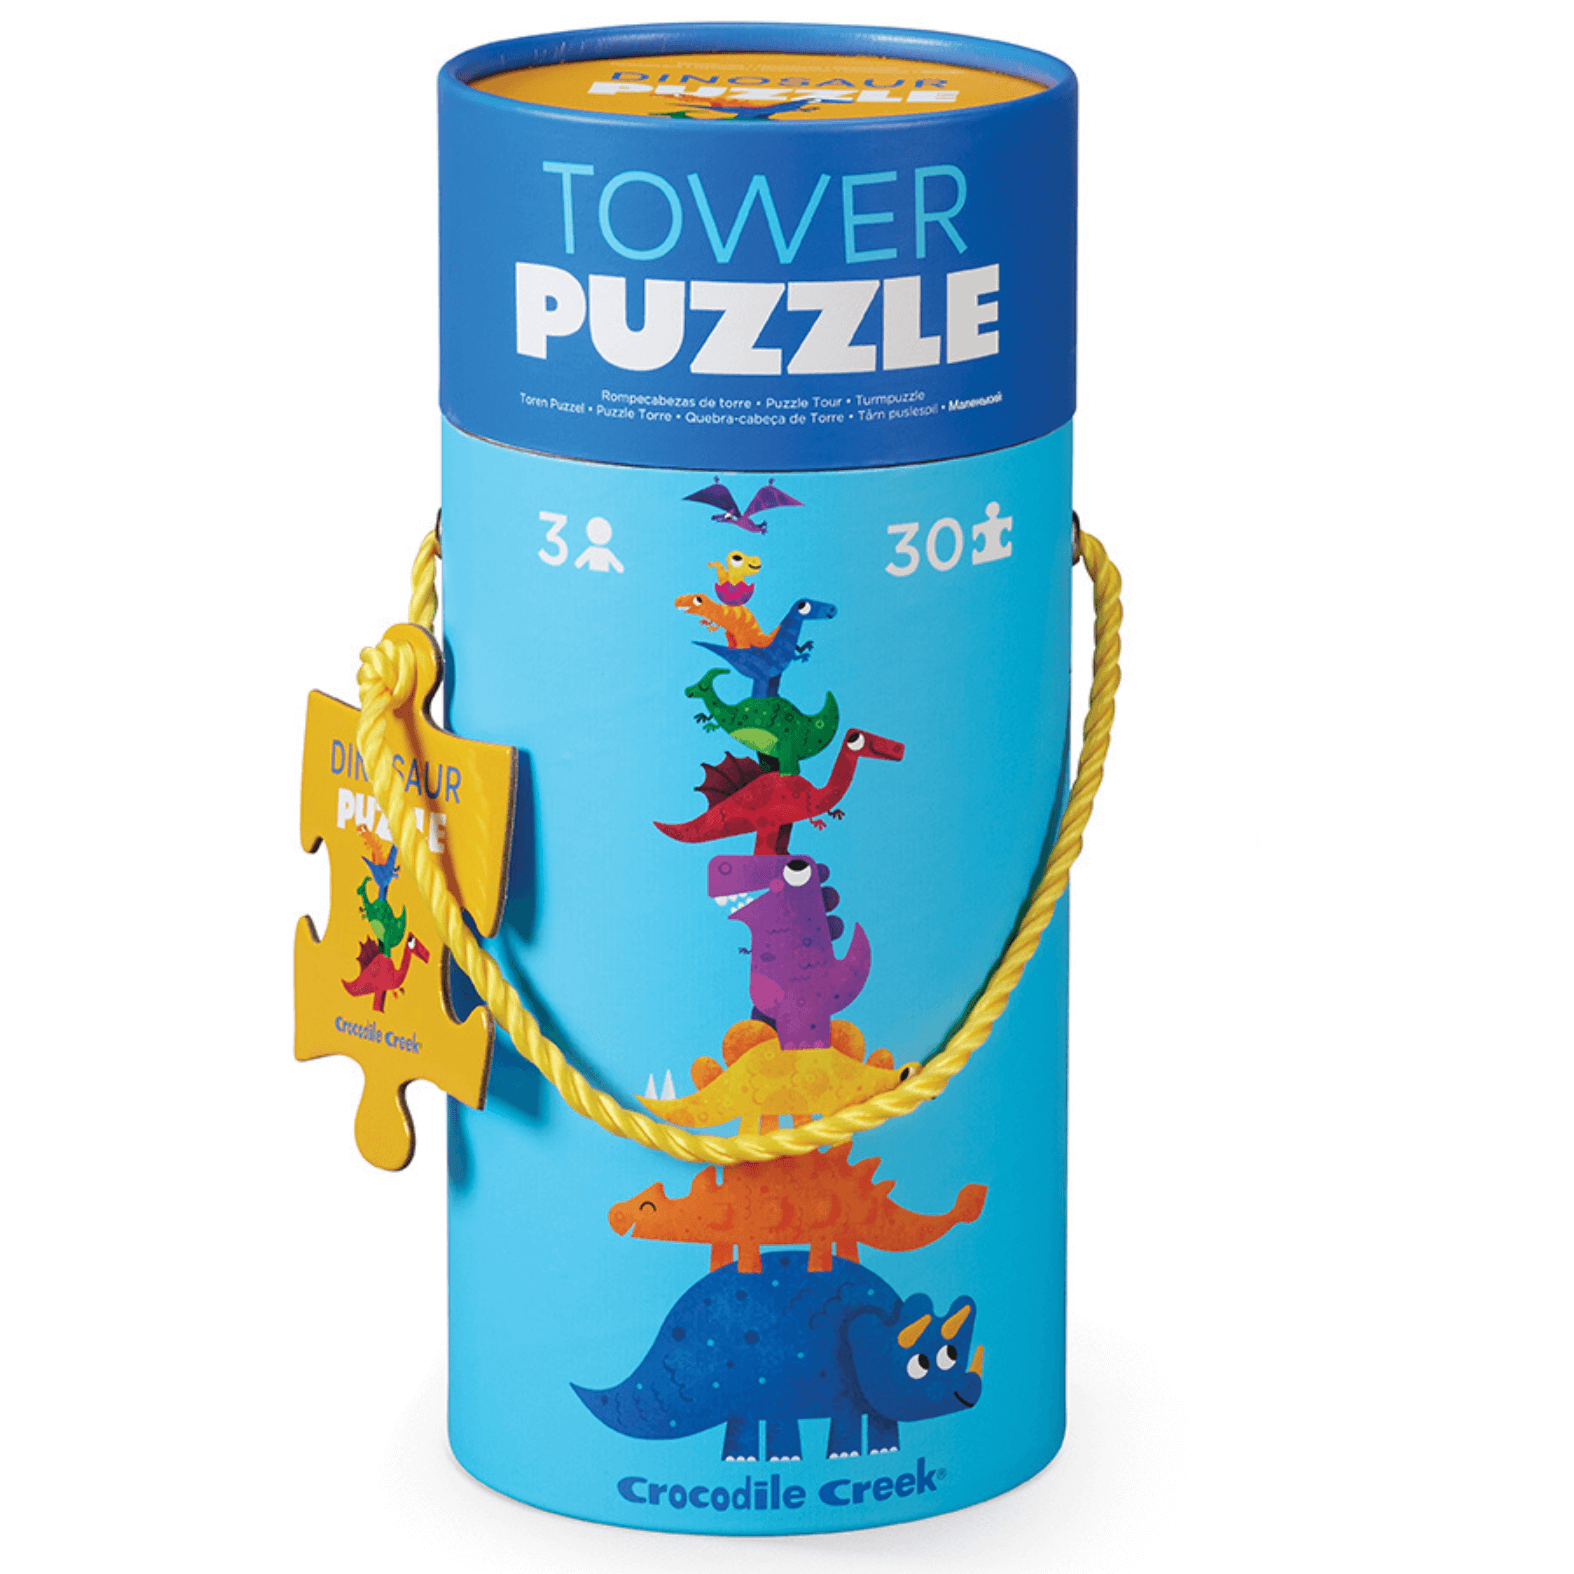 Crocodile creek tower puzzle - angus and dudley